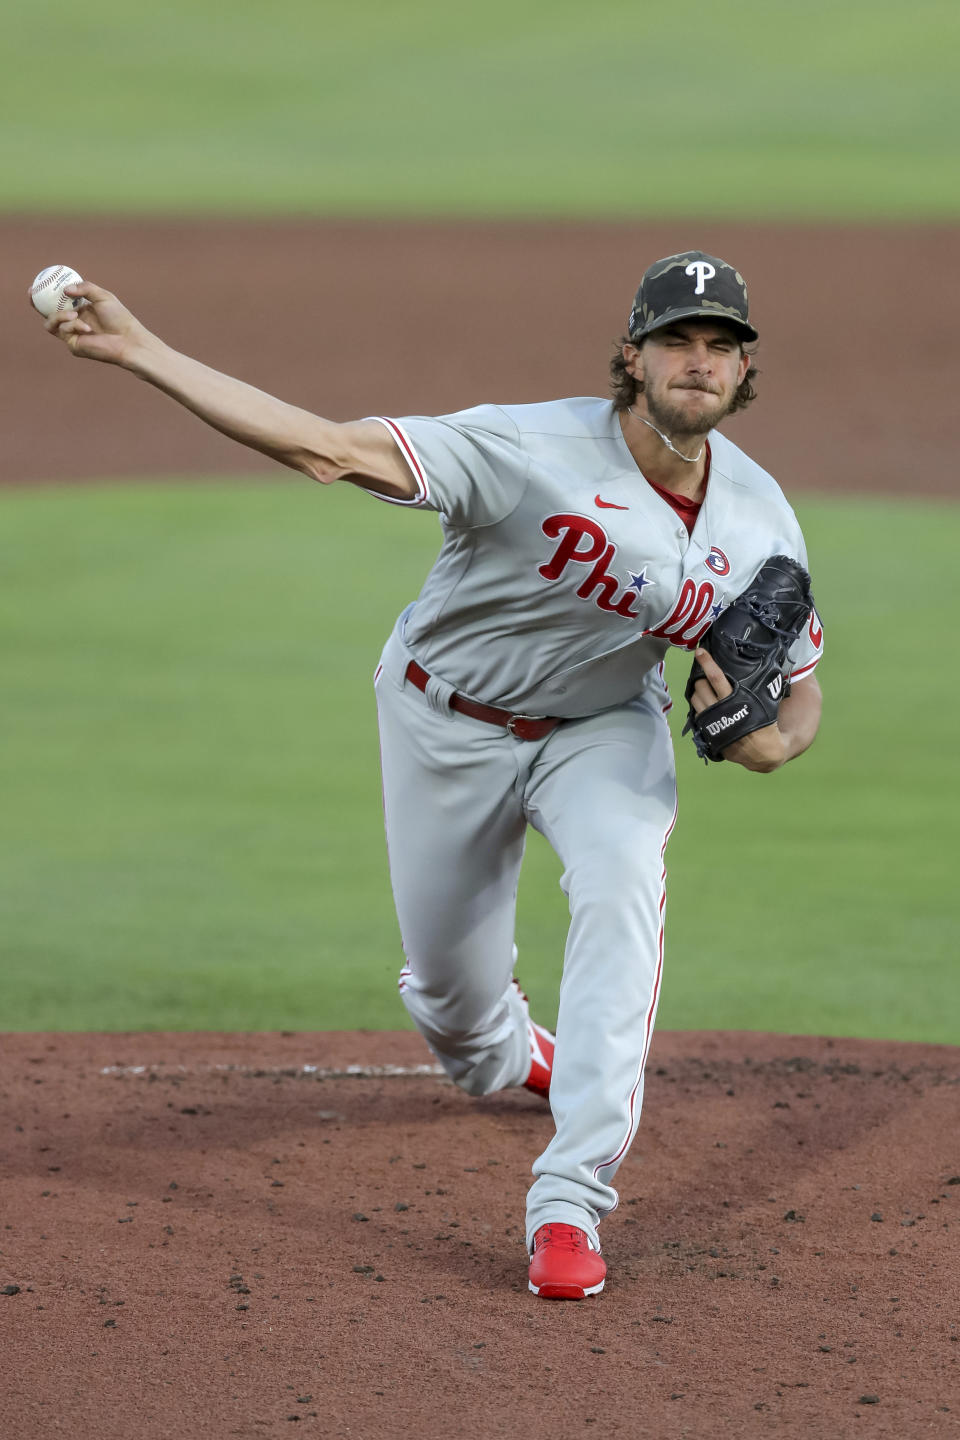 Philadelphia Phillies starting pitcher Aaron Nola throws against the Toronto Blue Jays during the first inning of a baseball game Saturday, May 15, 2021, in Dunedin, Fla. (AP Photo/Mike Carlson)